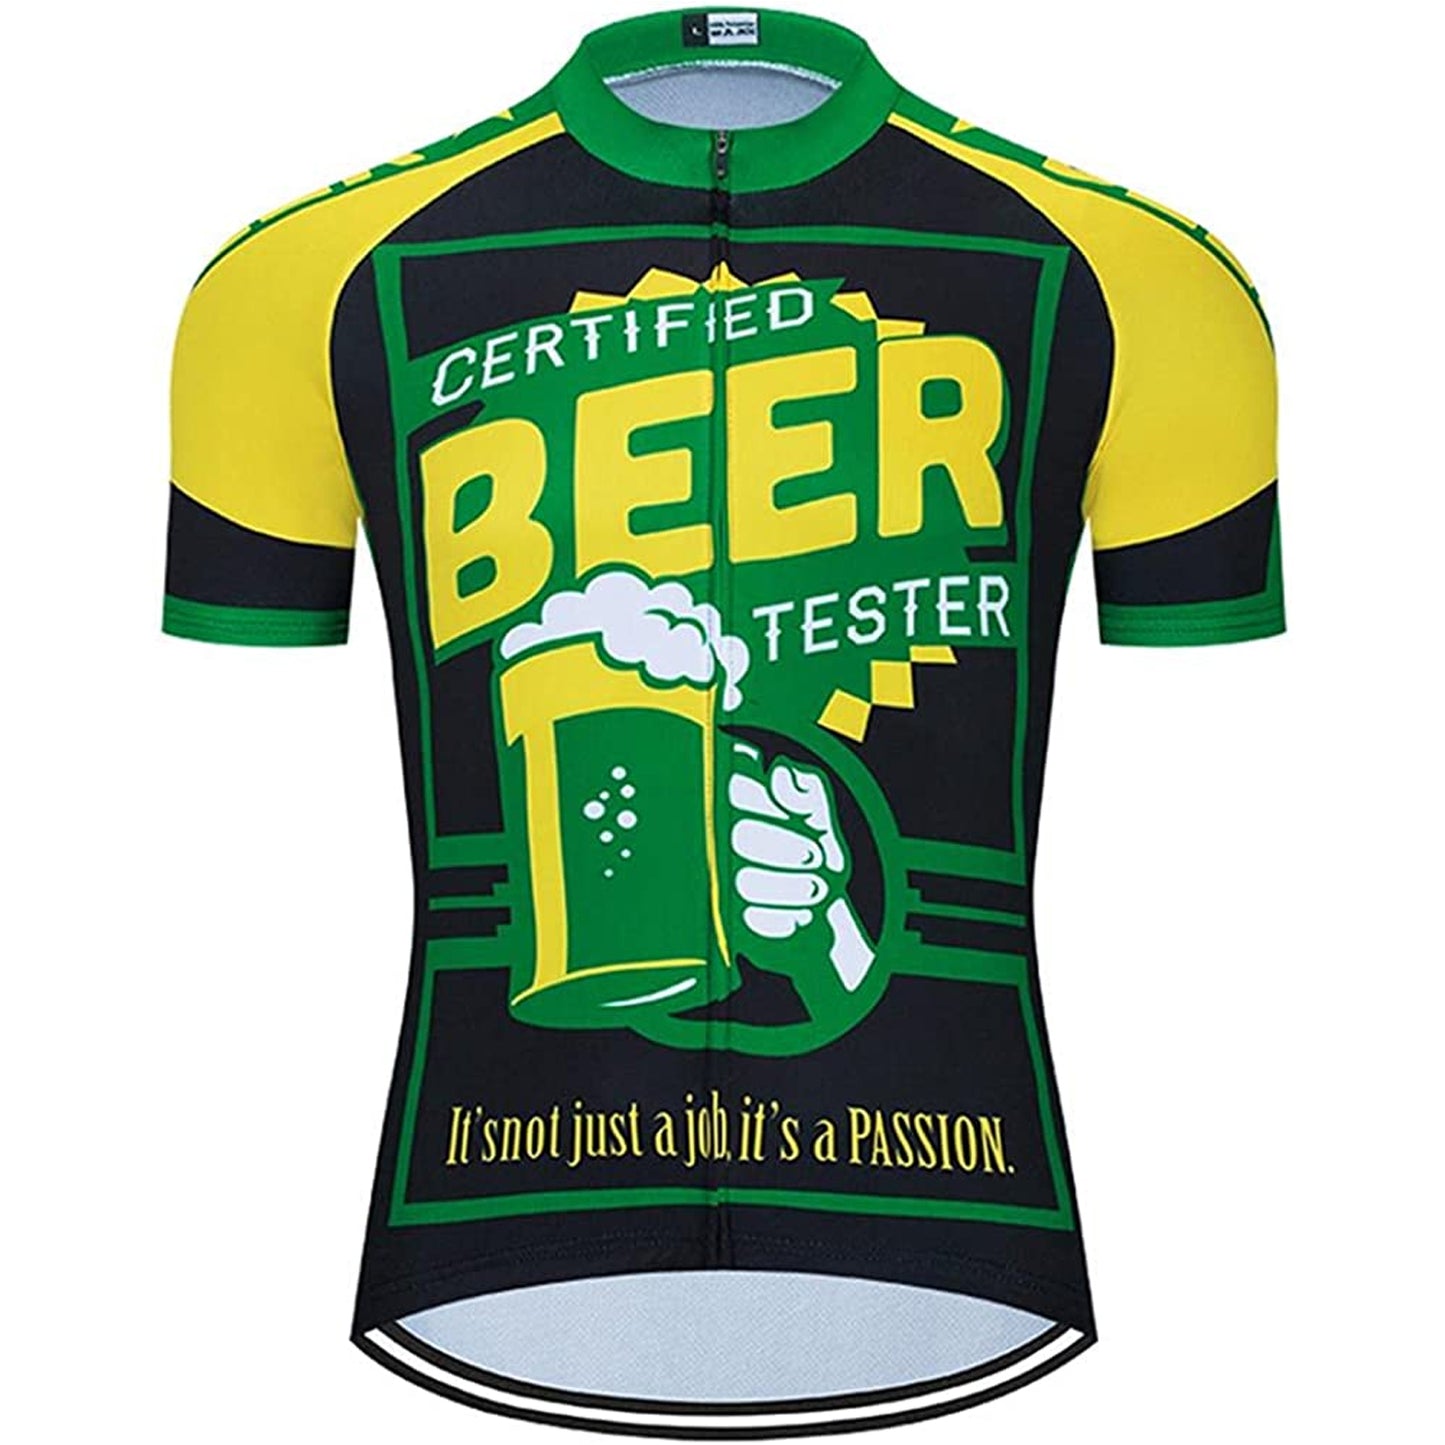 Certified Beer Tester Men Funny MTB Short Sleeve Cycling Jersey Top